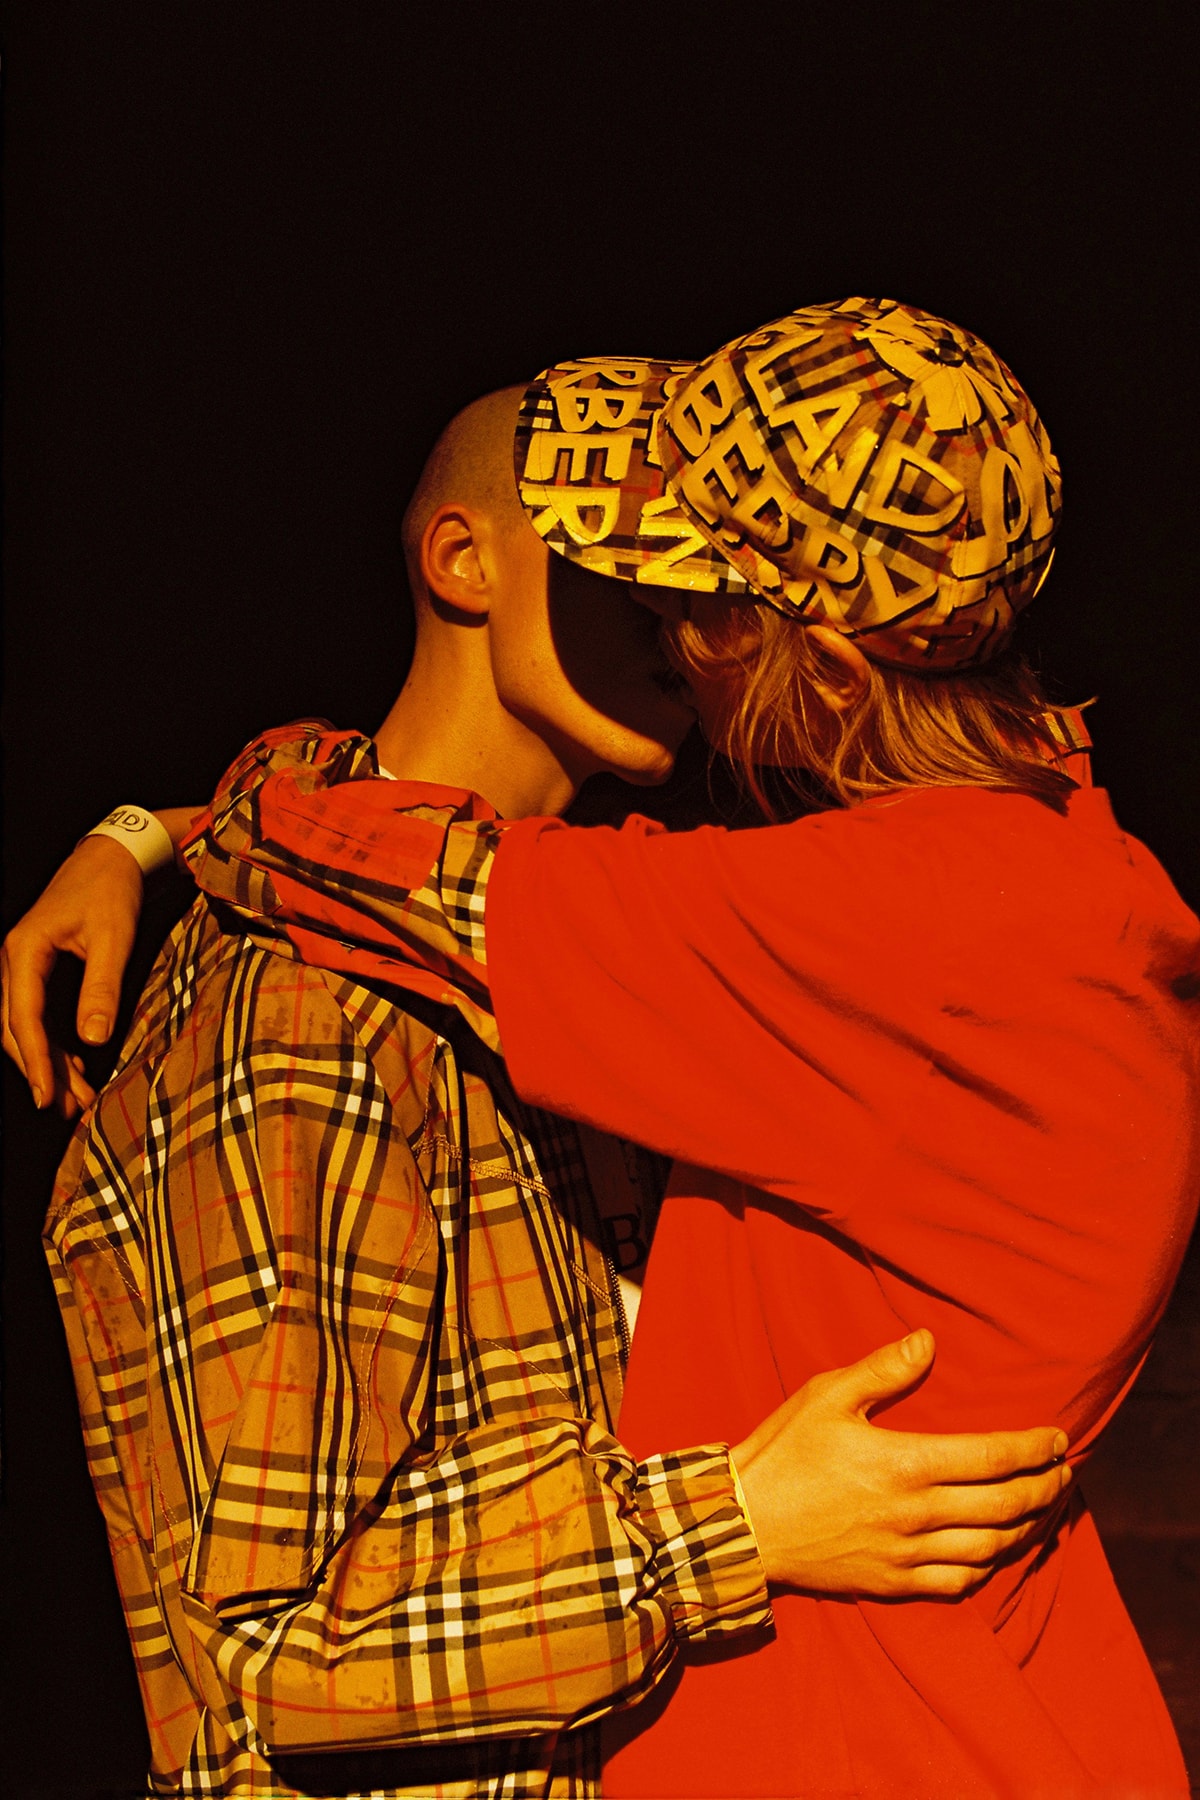 opening ceremony burberry capsule collaboration exclusive plaid check track suit red retro logo fall winter 2018 capsule july 13 drop release date buy purchase look book release